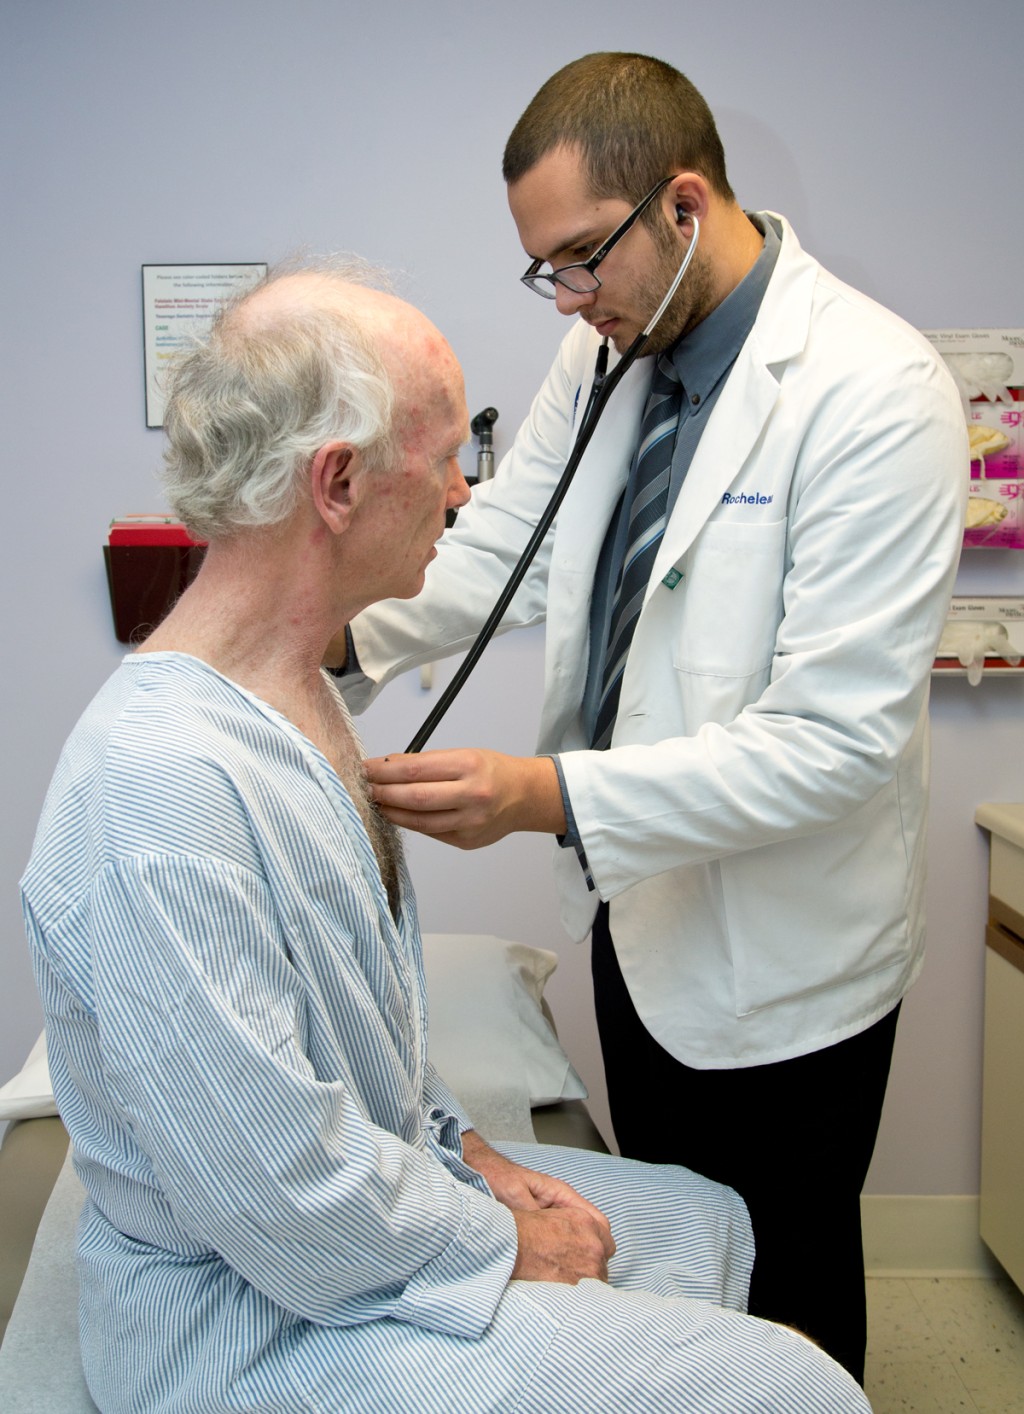 A C O M student uses a stethoscope to listen to an elderly patient's heartbeat and breathing